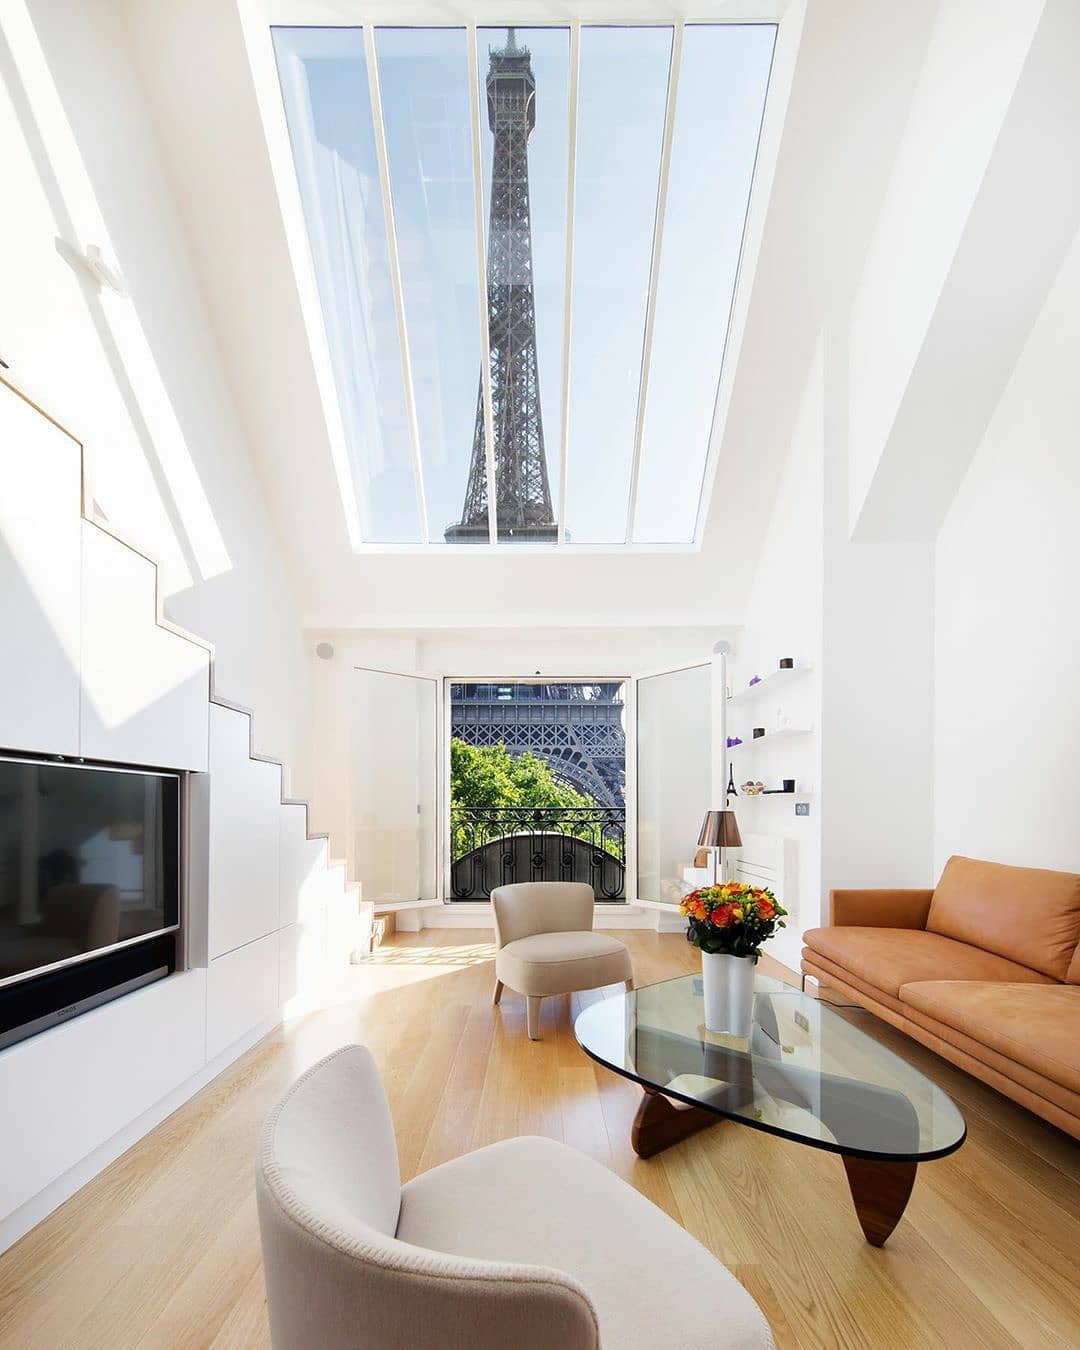 The 'Alexandra et Pascal' is an apartment with mesmerizing views of the Eiffel Tower, Paris, France by Agence Charlotte Féquet